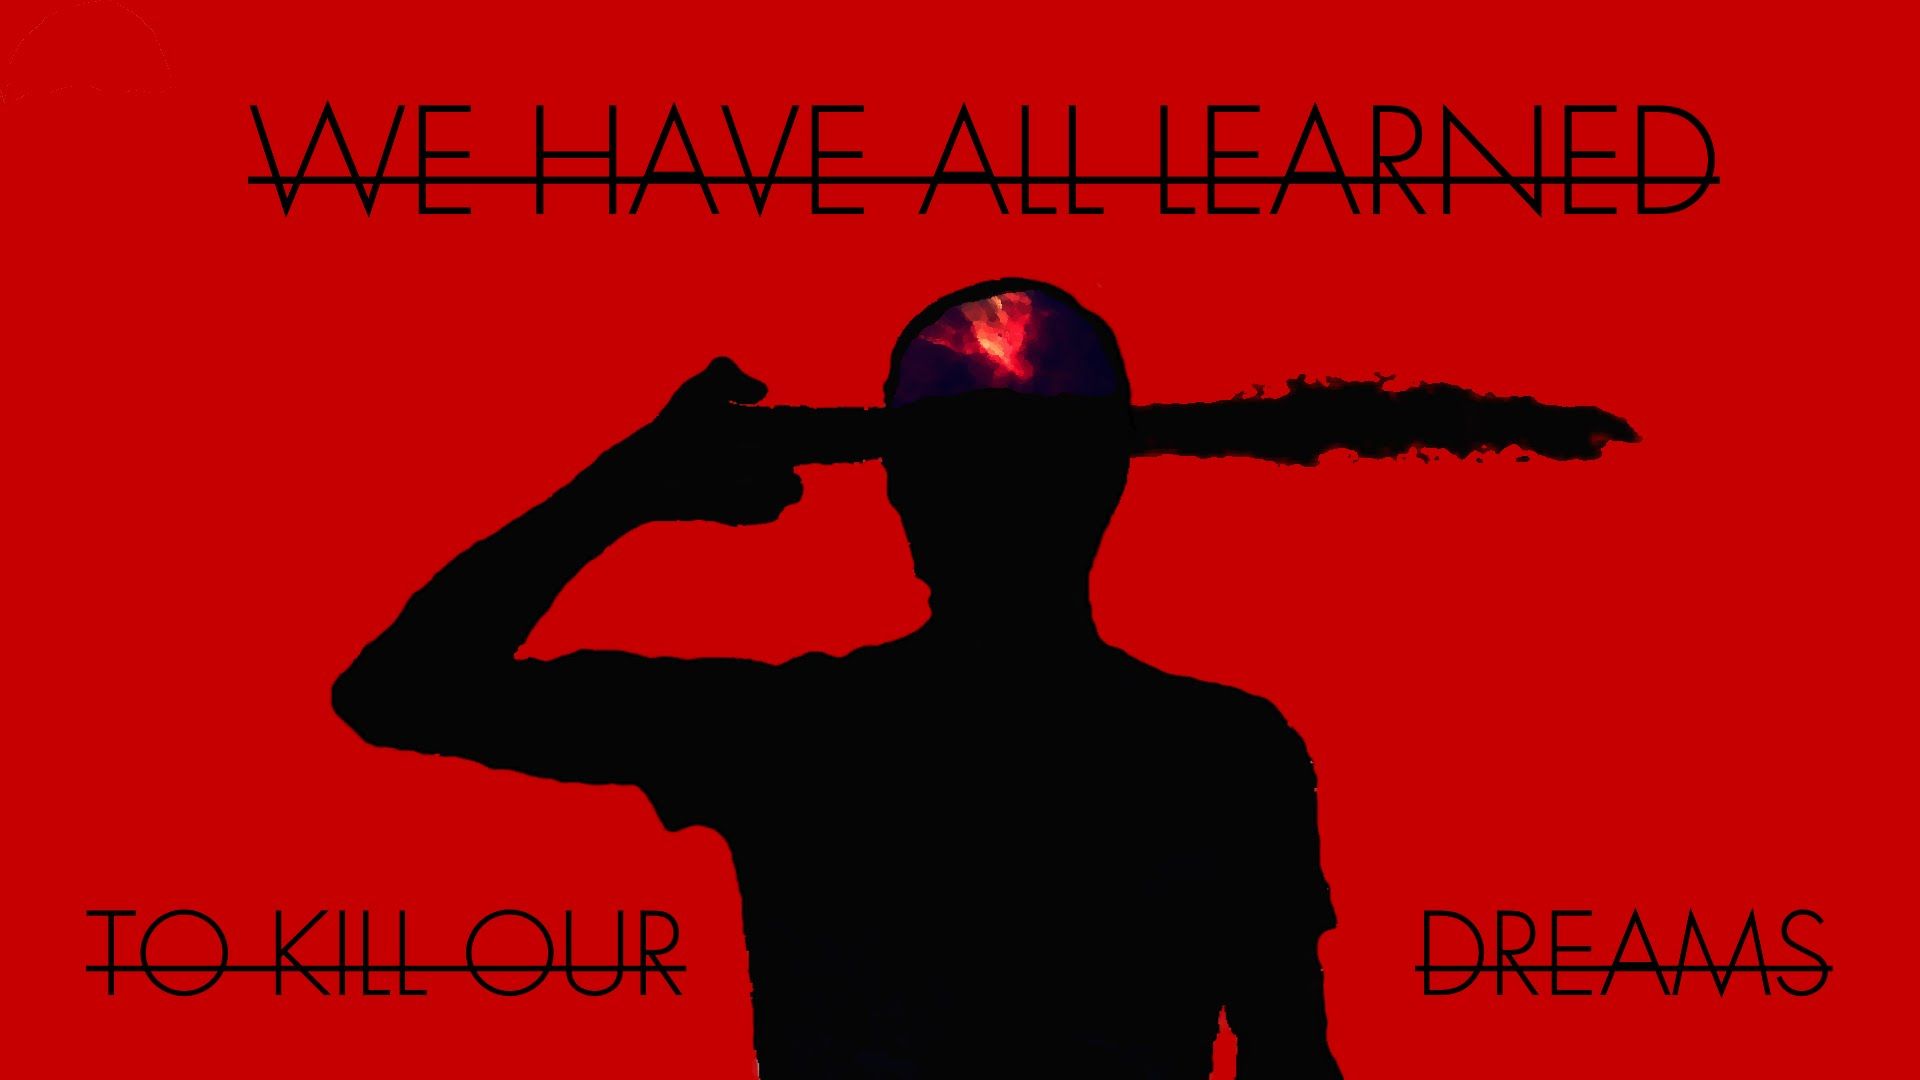 Twenty One Pilots We Have All Learned To Kill Our Dreams